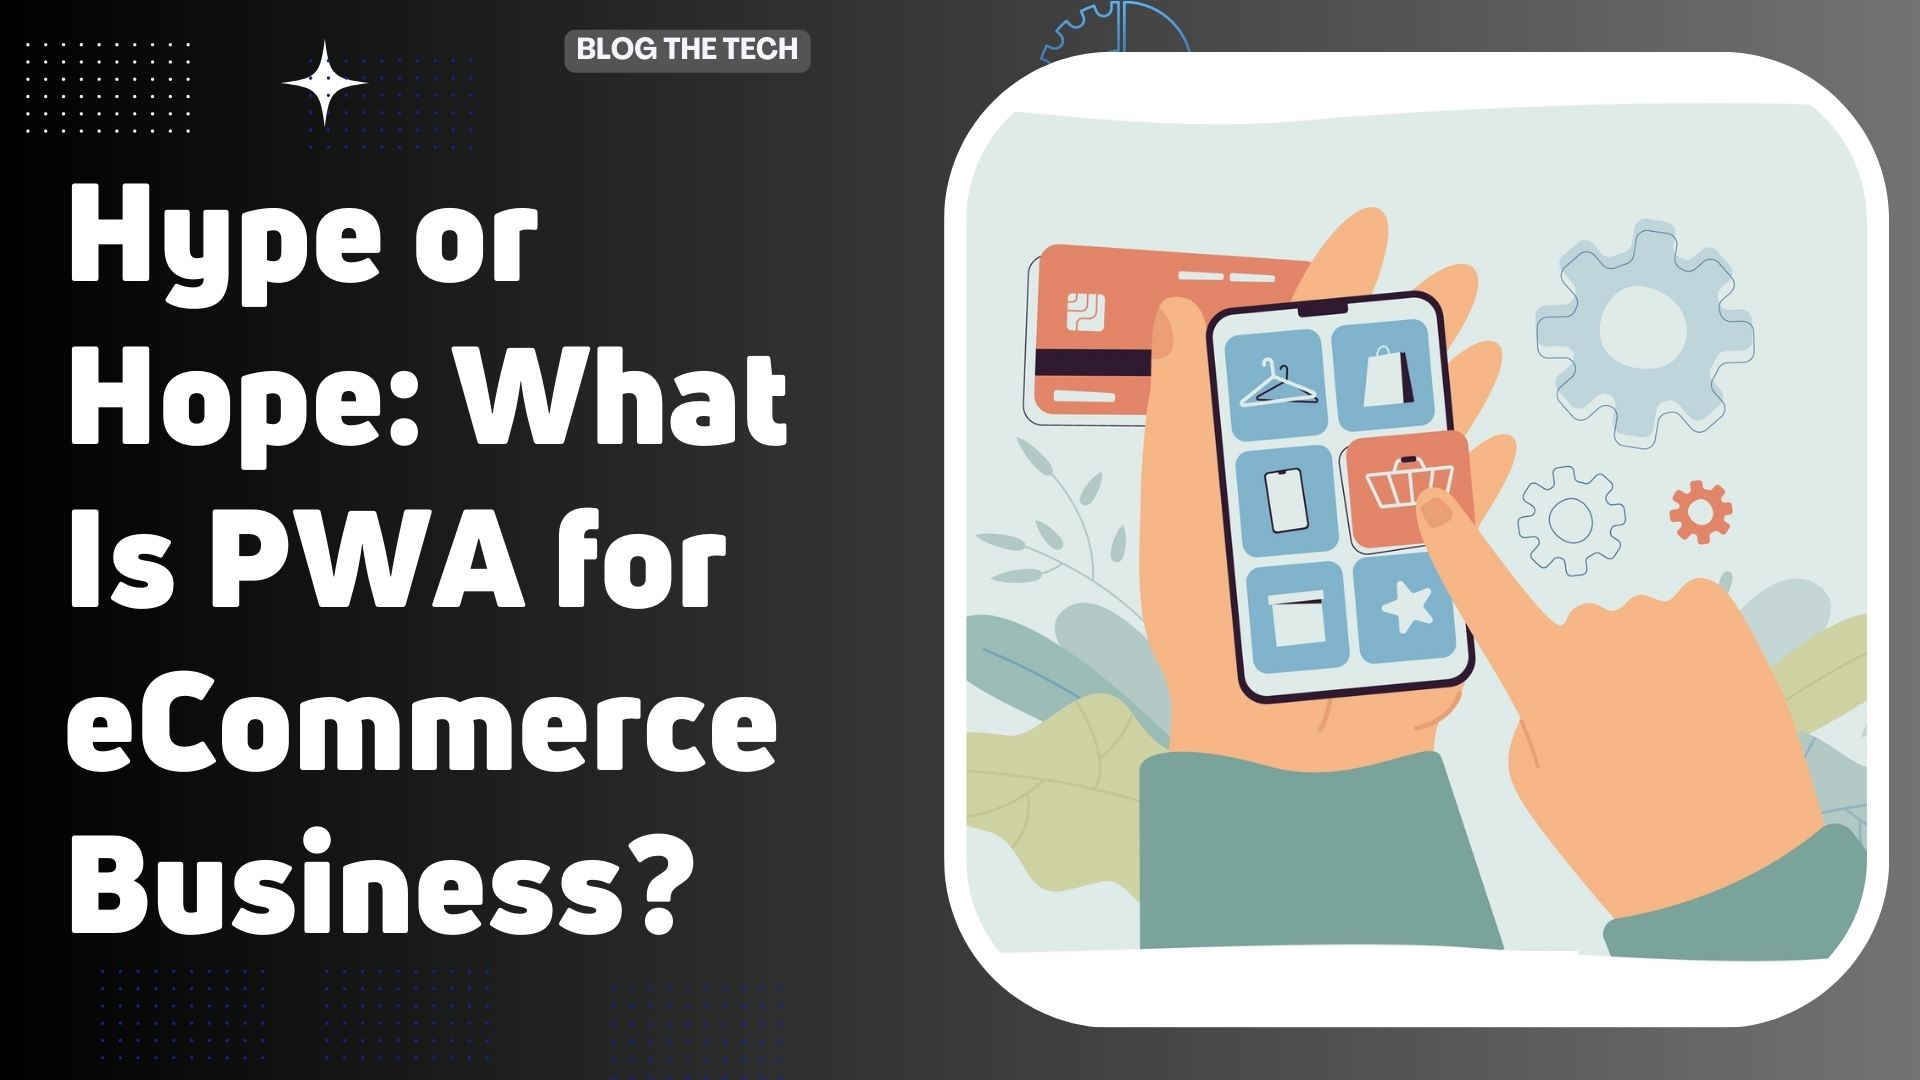 Hype or Hope: What Is PWA for eCommerce Business?